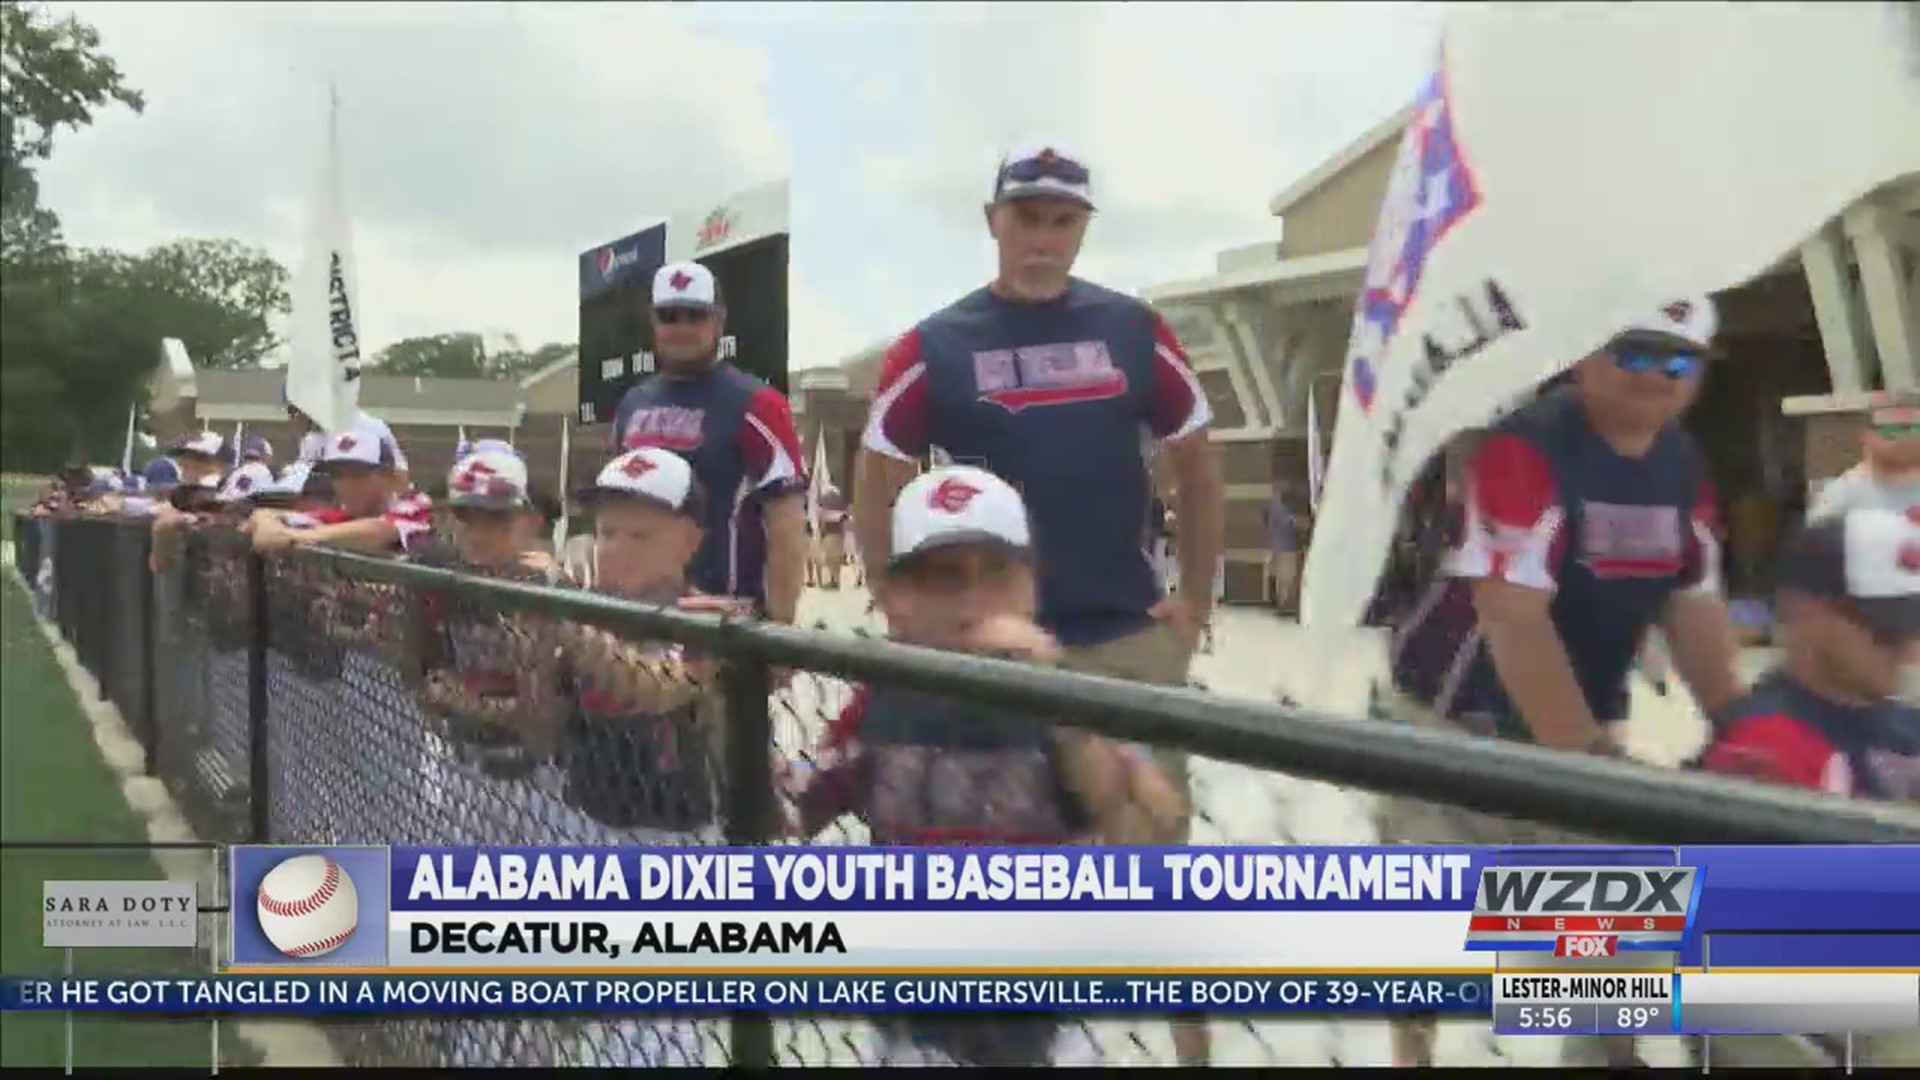 Hundreds of families from across the state gathered here in the Tennessee Valley for the tournament.